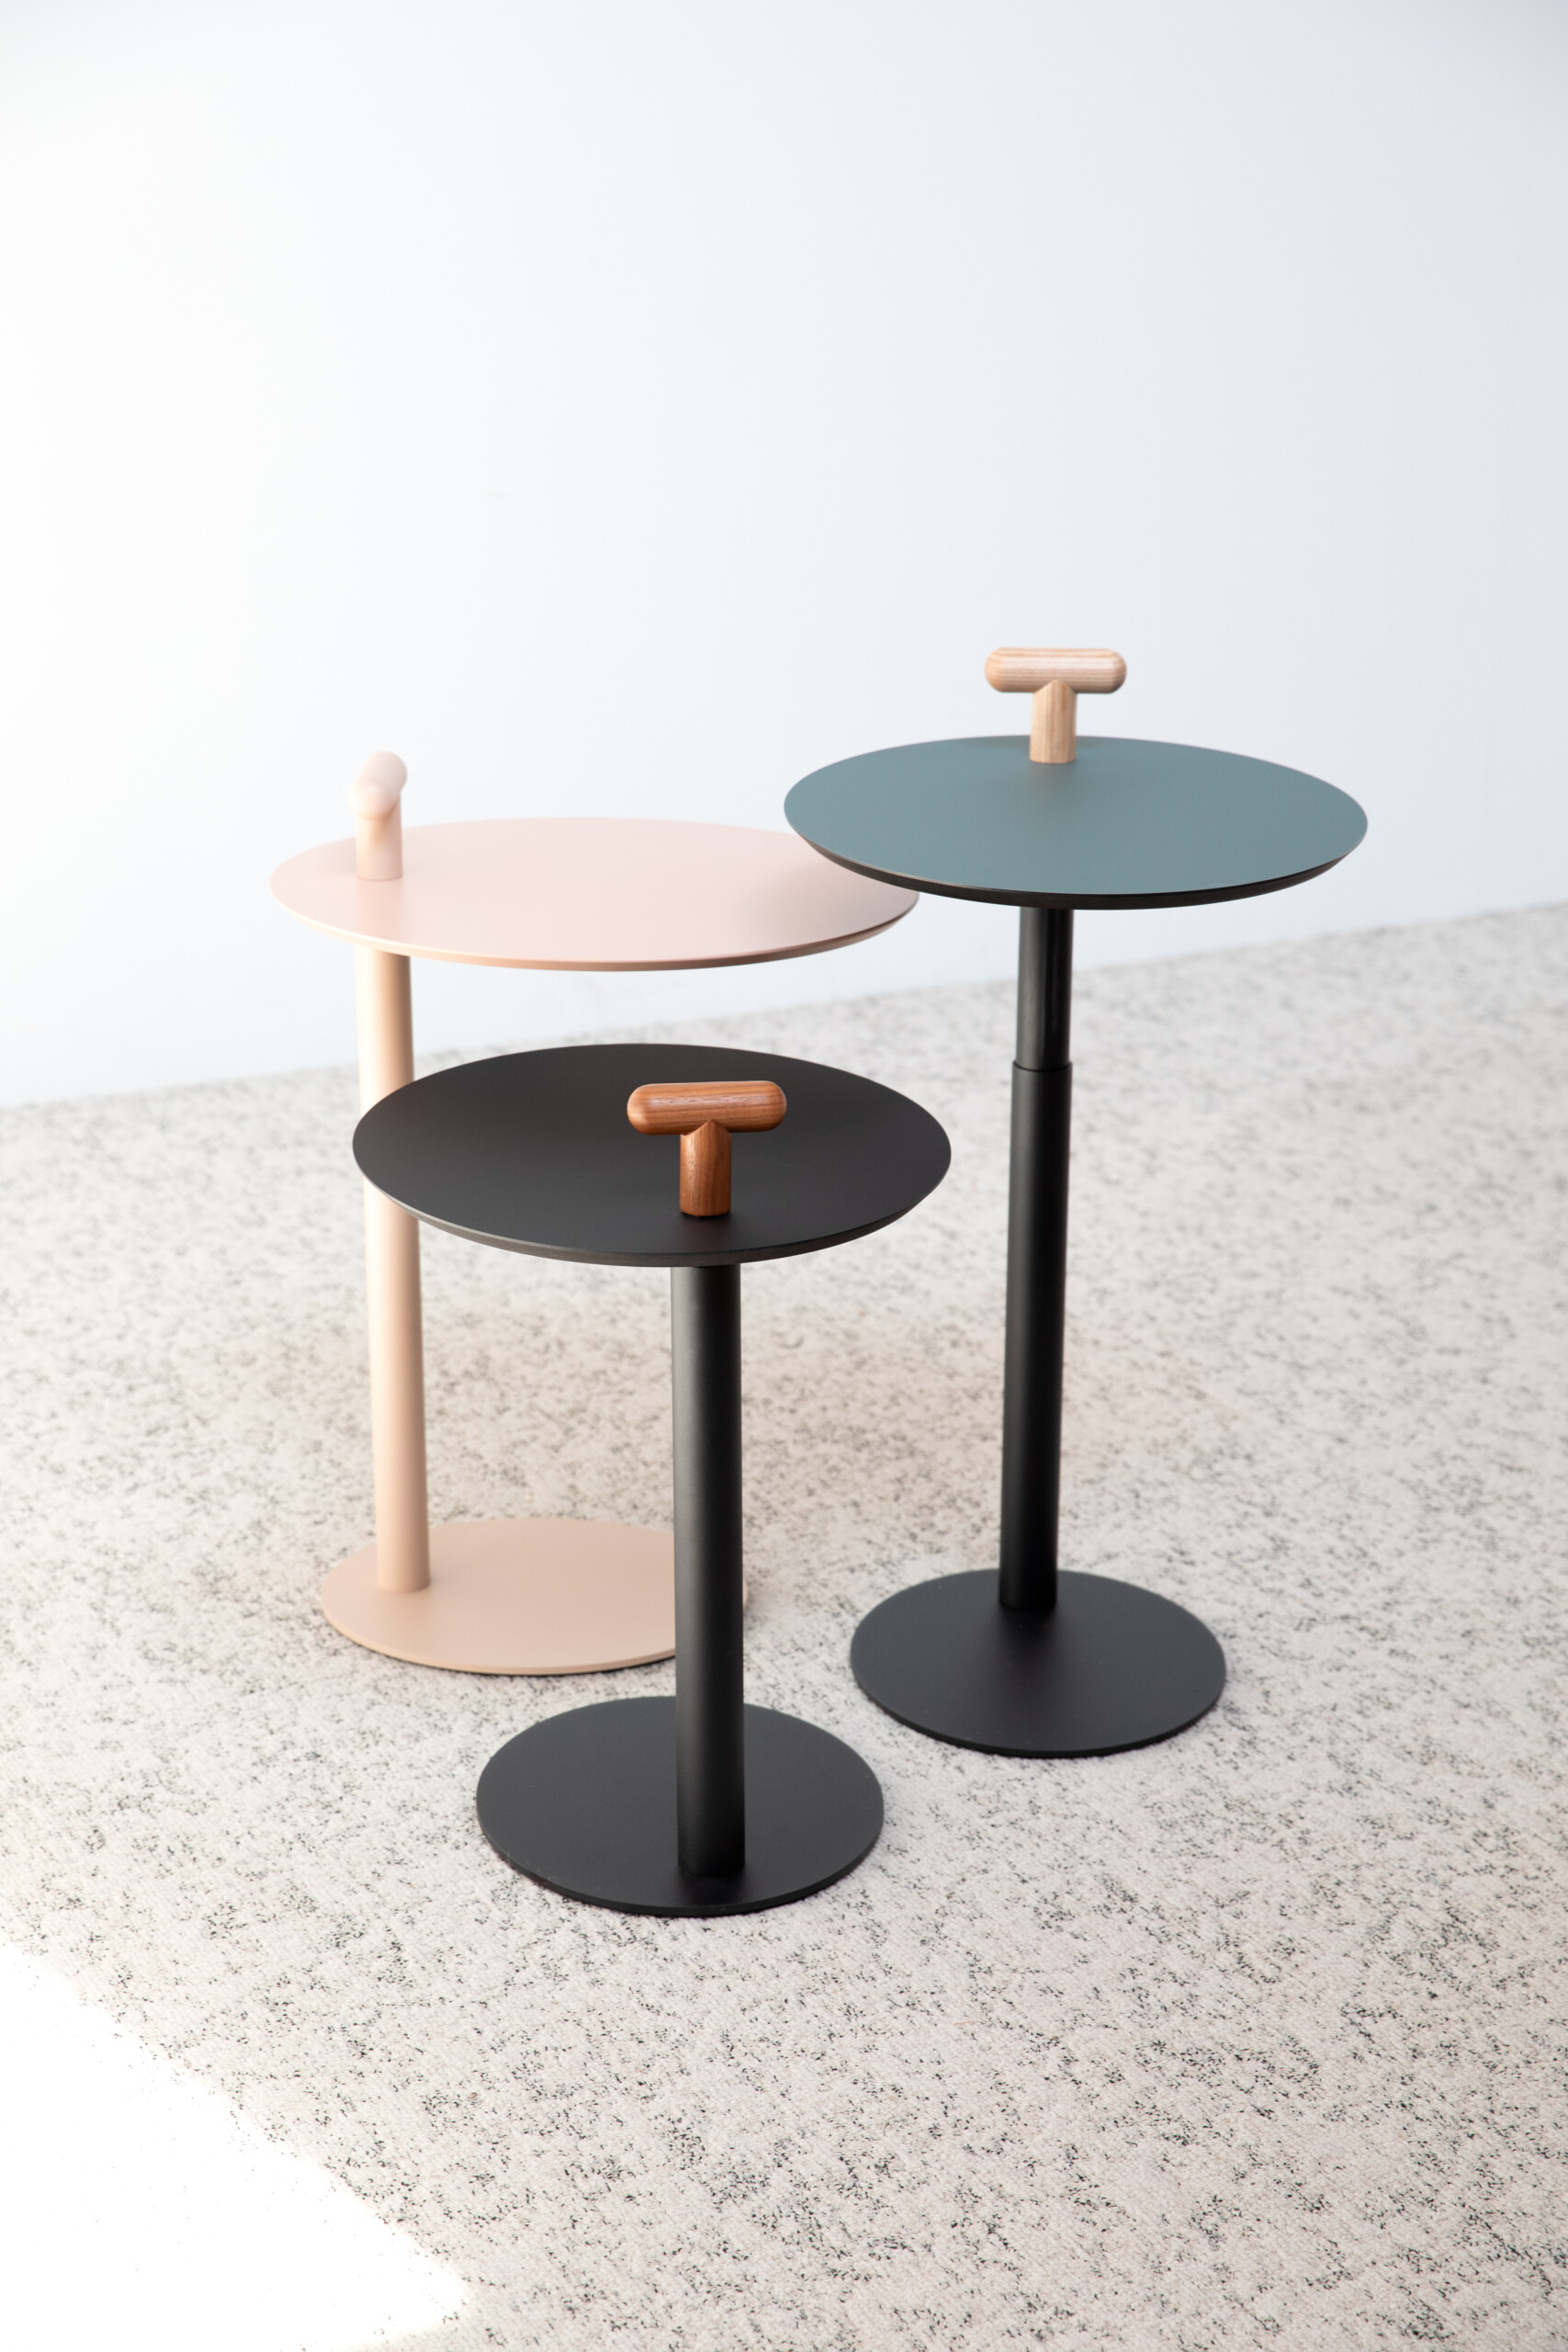 Bulo Lucca by Gensler: Compact side table with adjustable wooden handle and fixed-height monochrome options.